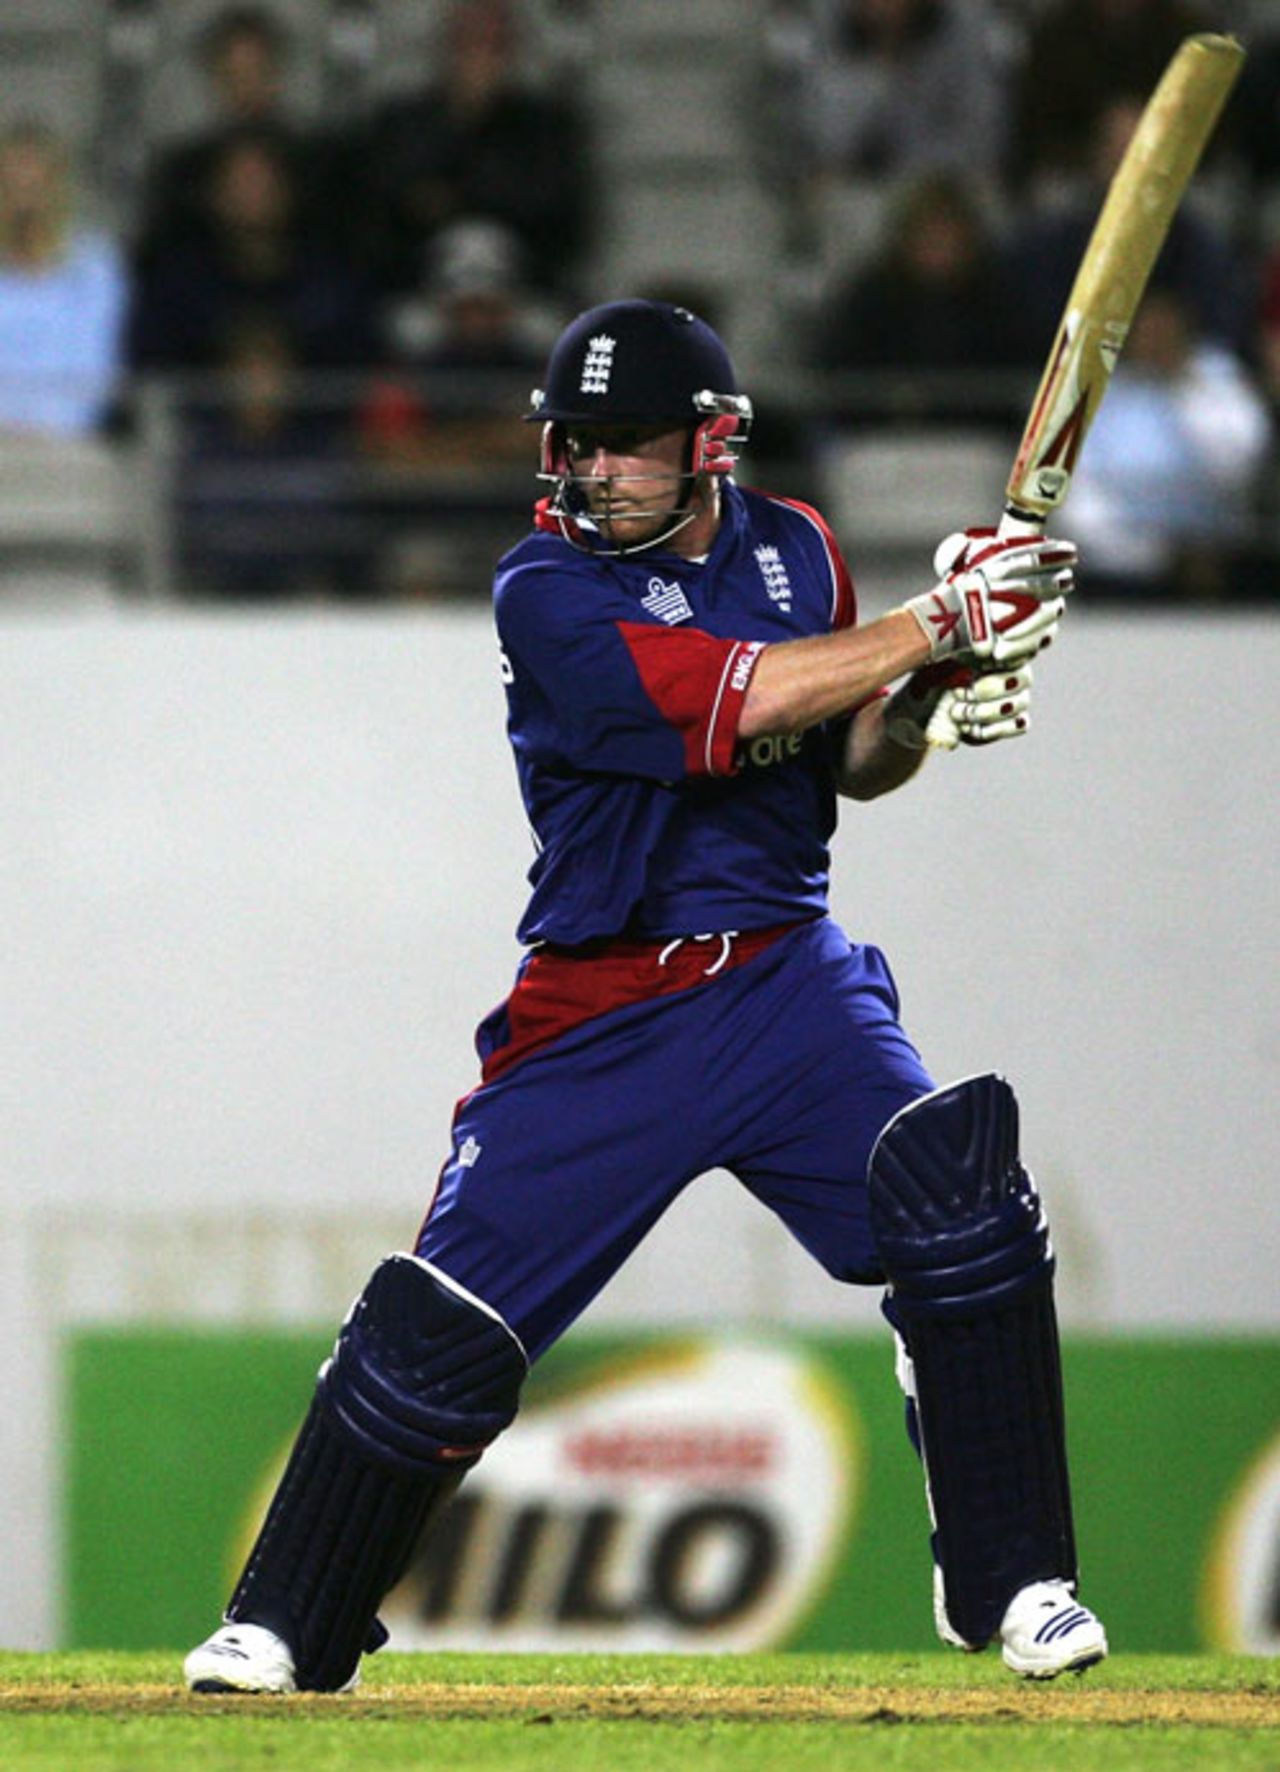 Paul Collingwood cuts behind square, New Zealand v England, 3rd ODI, Auckland, February 15, 2008